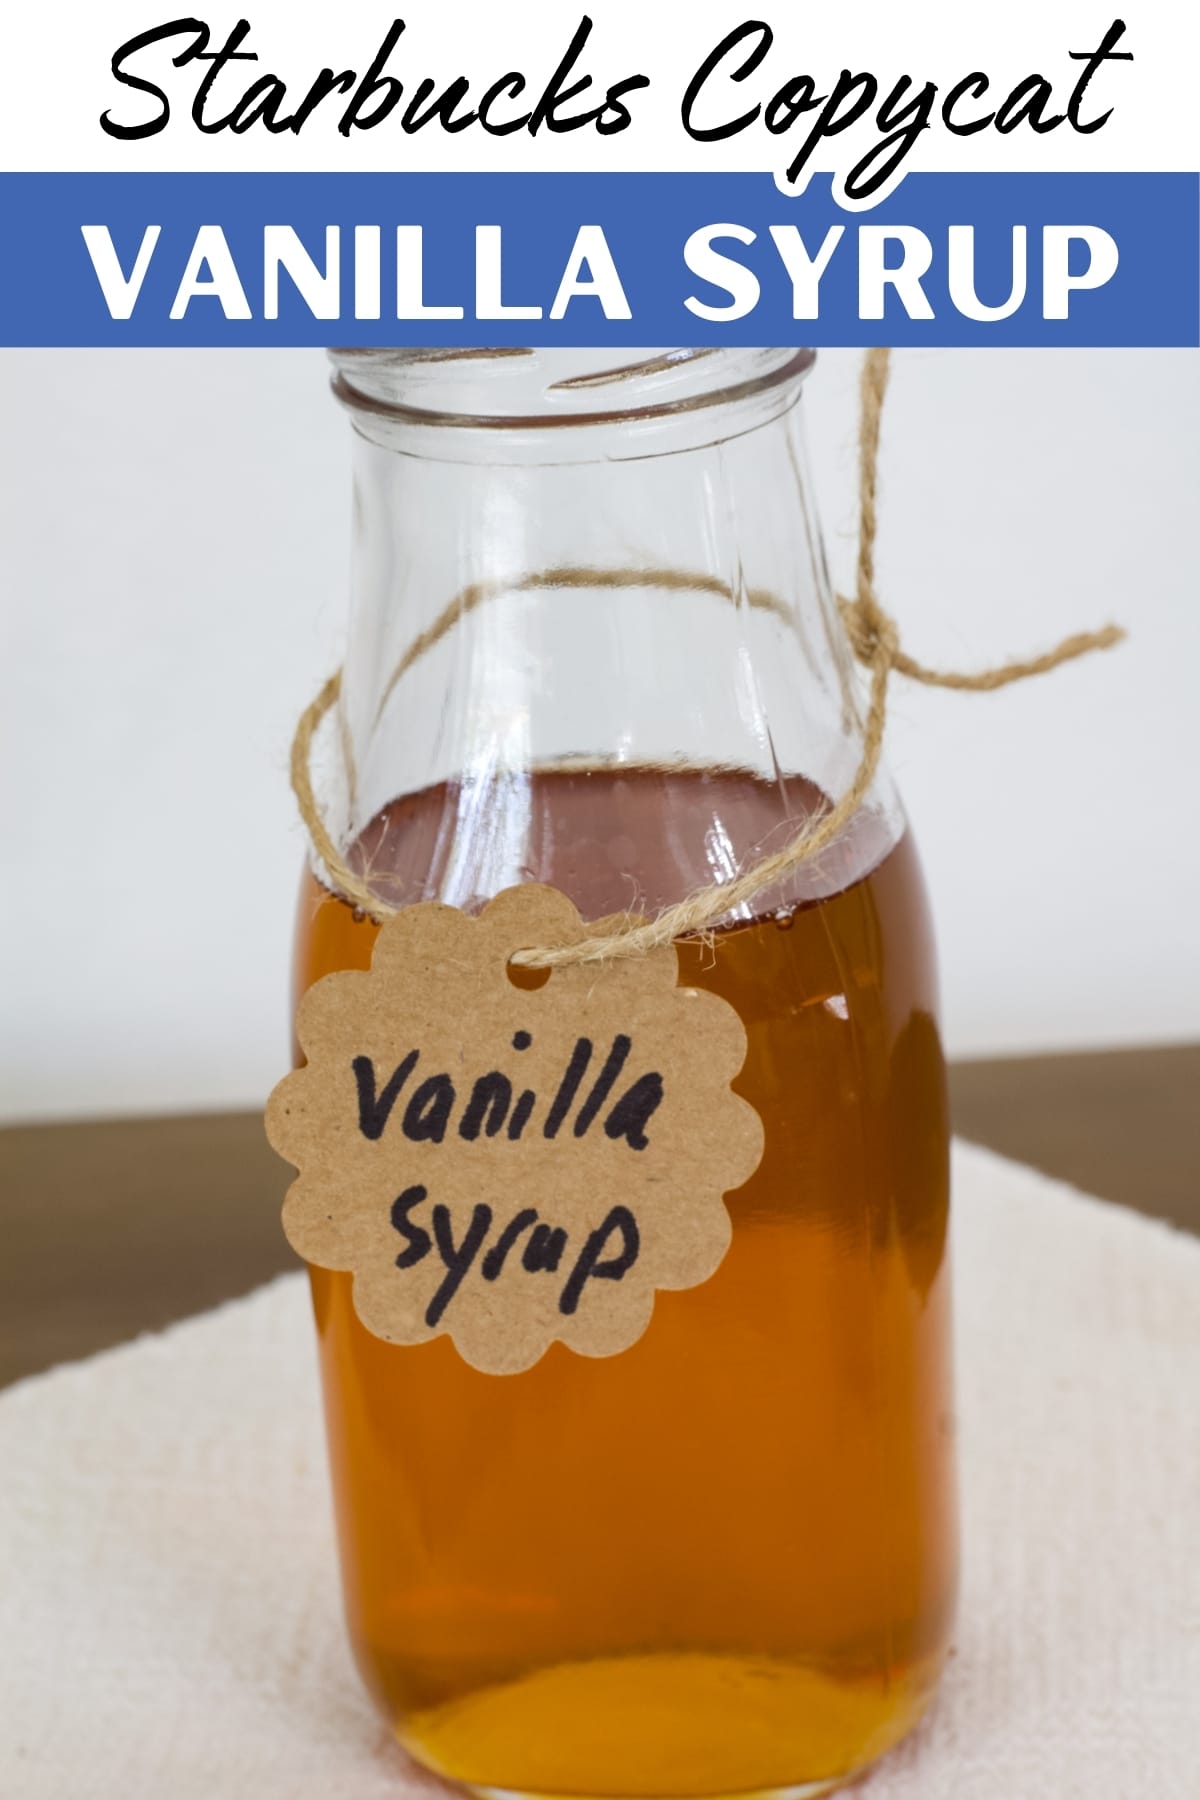 Make your own homemade vanilla syrup with this Starbucks copycat recipe. Learn how to make a delicious syrup using simple ingredients. via @mindyscookingobsession